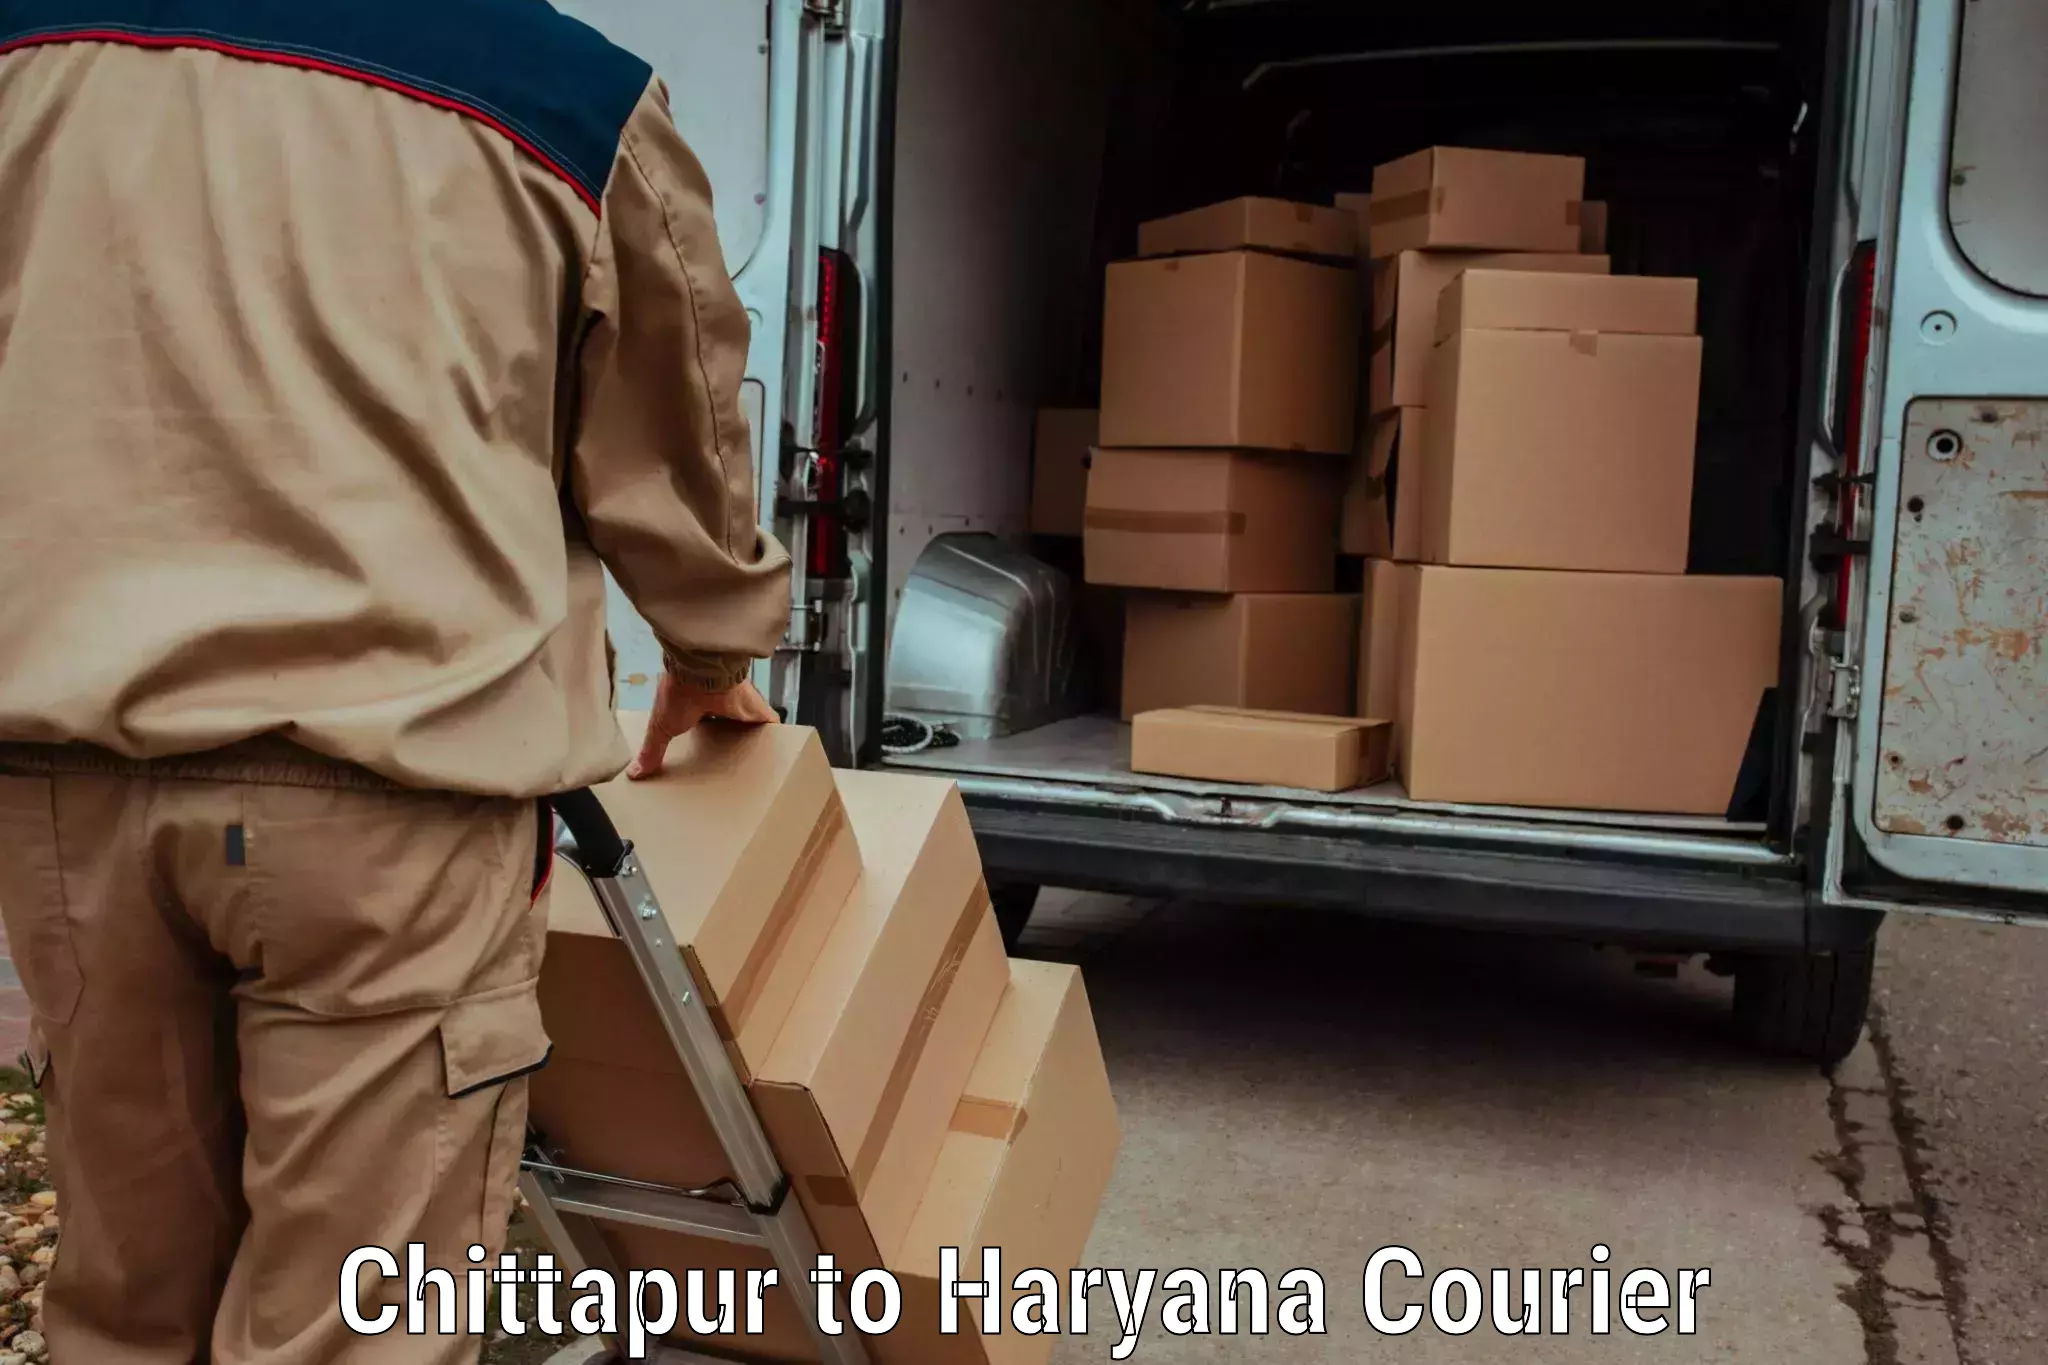 Easy access courier services Chittapur to Gurgaon